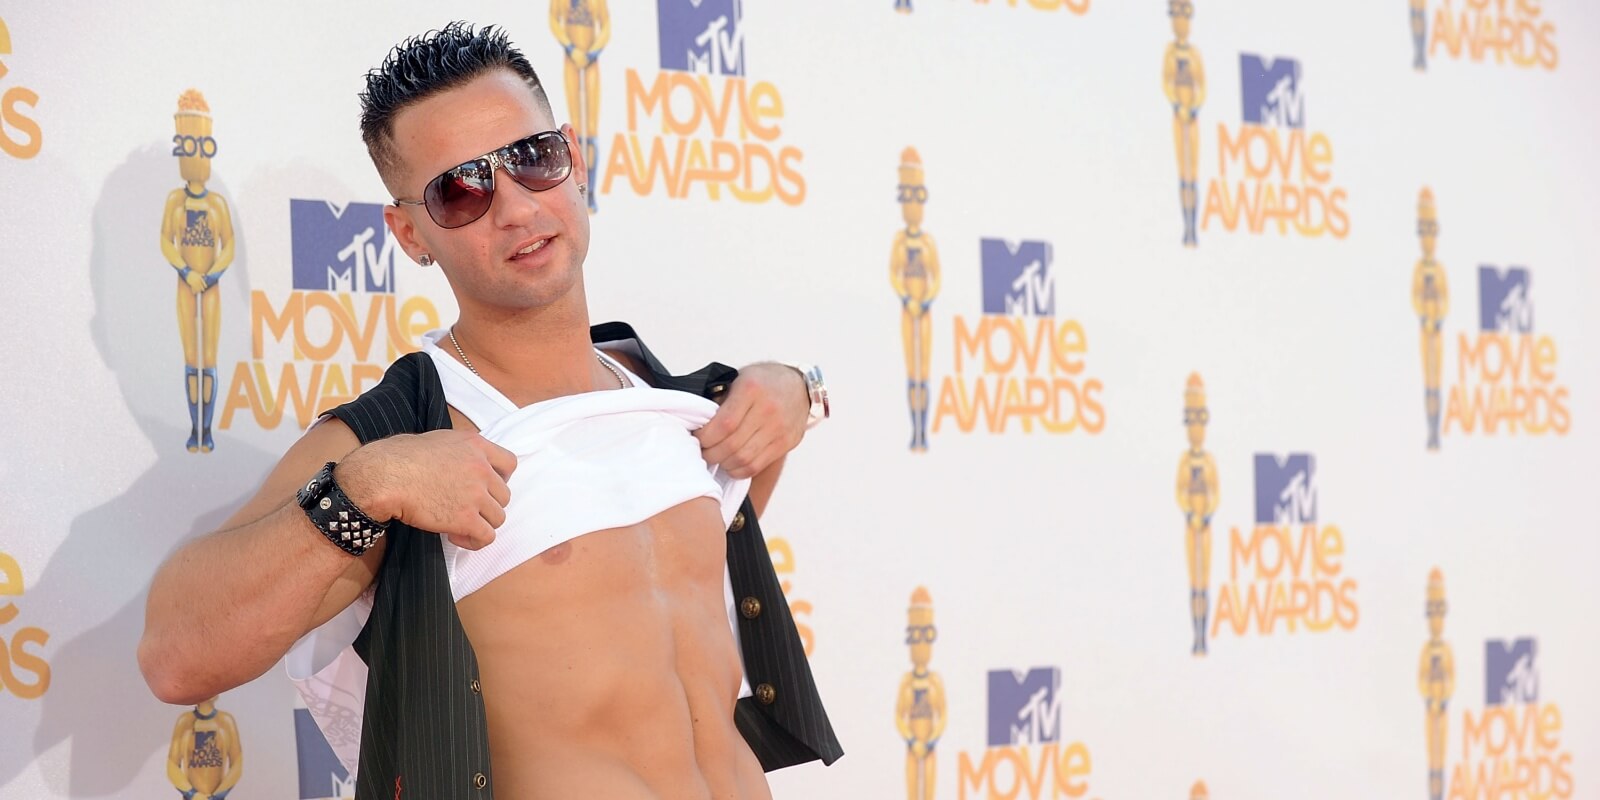 Then-'Jersey Shore' star Mike Sorrentino makes a red carpet appearance in 2010.